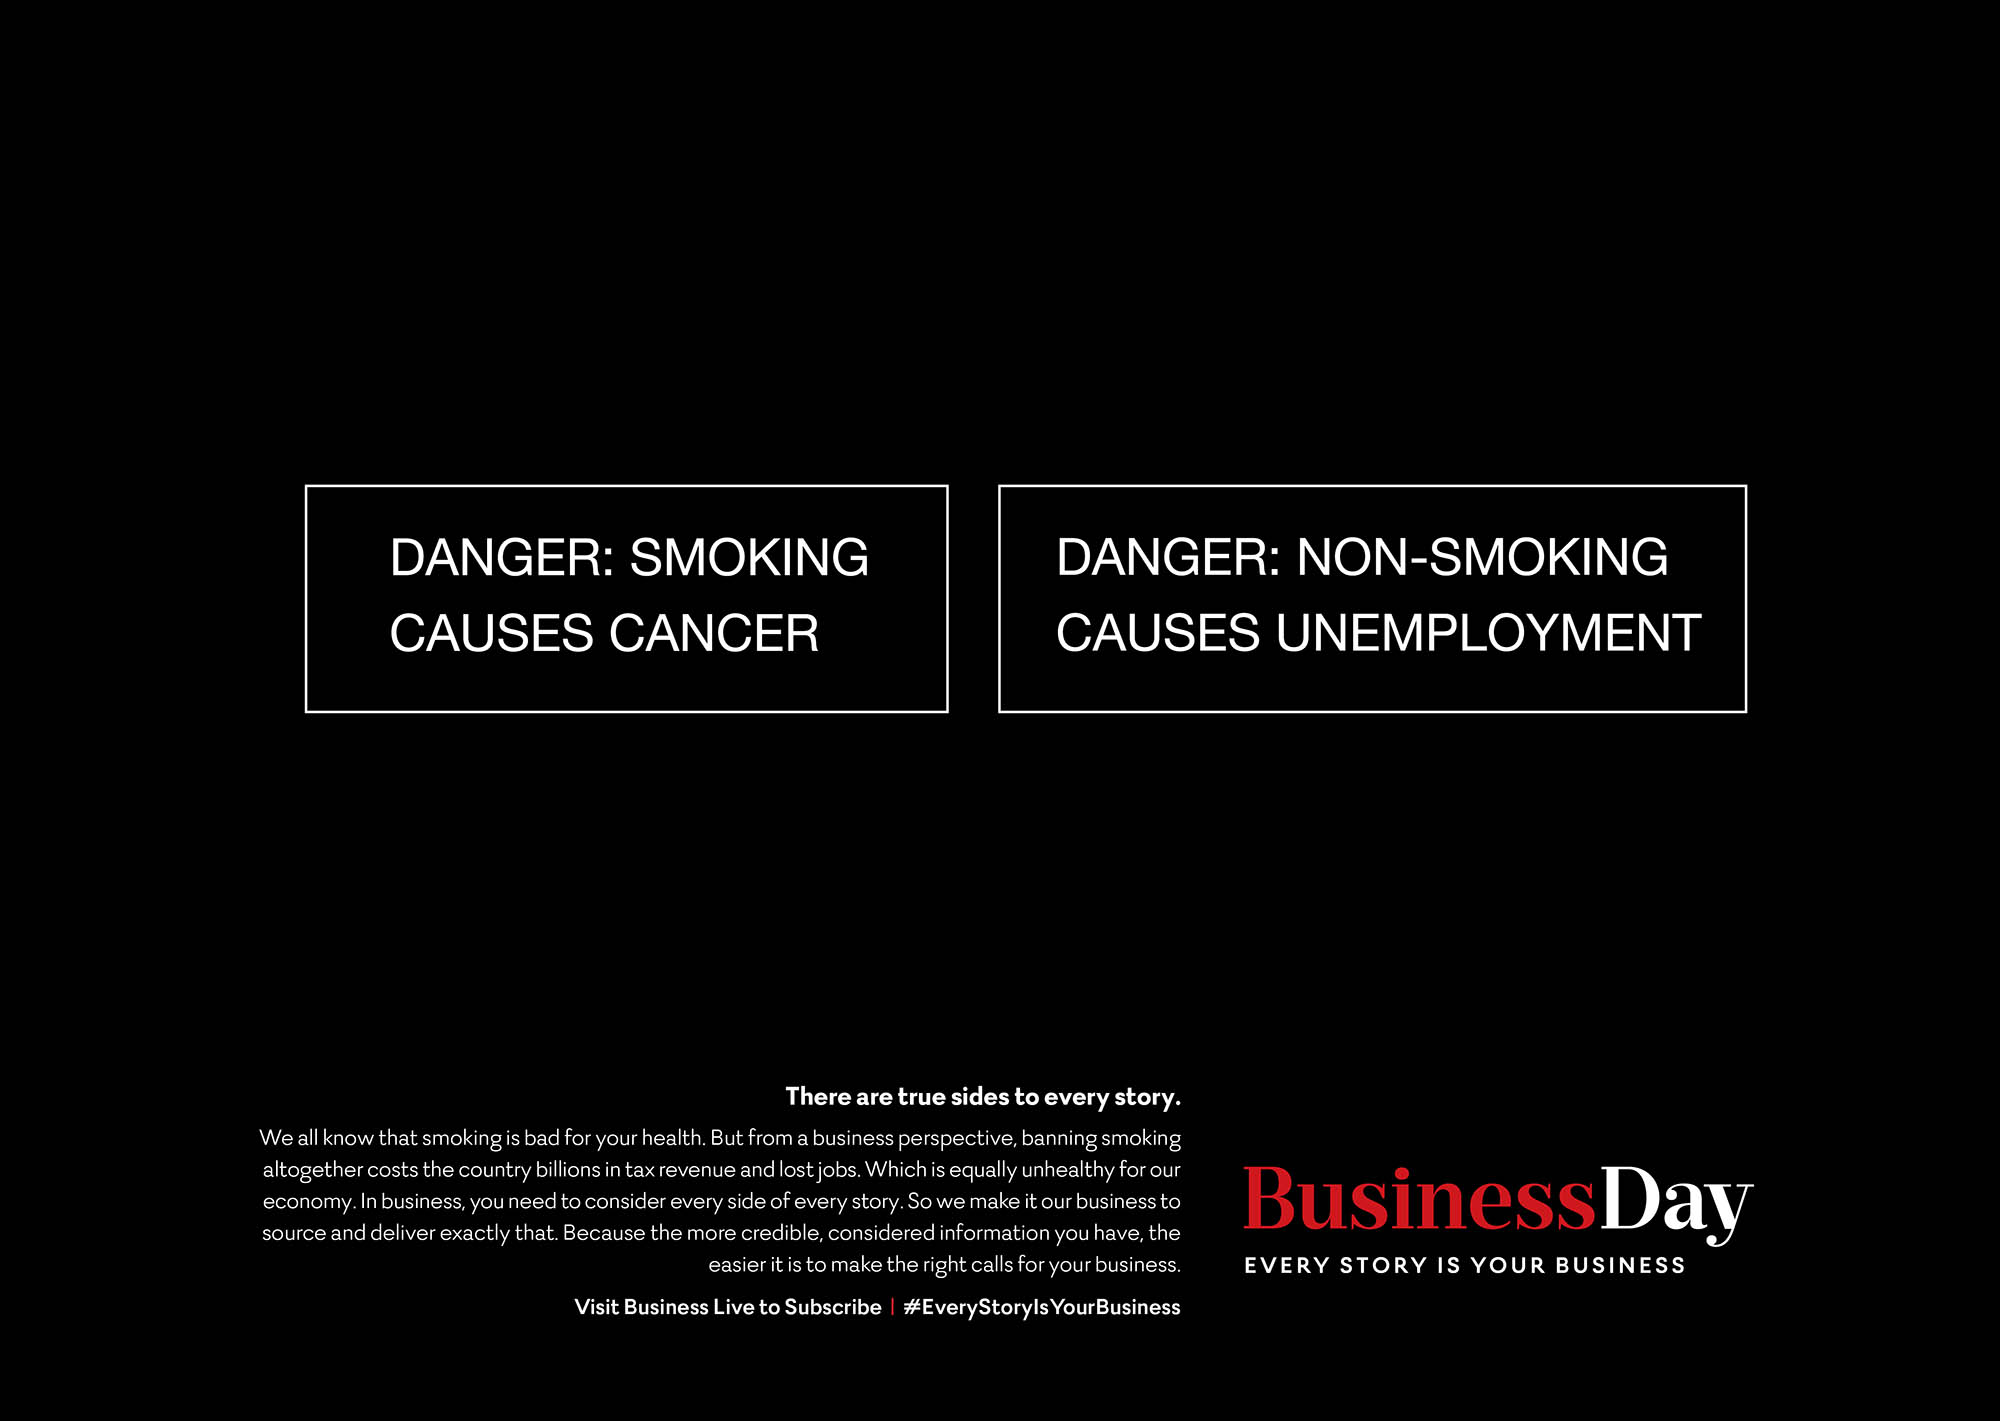 Business Day ‘Smoking: There are true sides to every story’ – Print